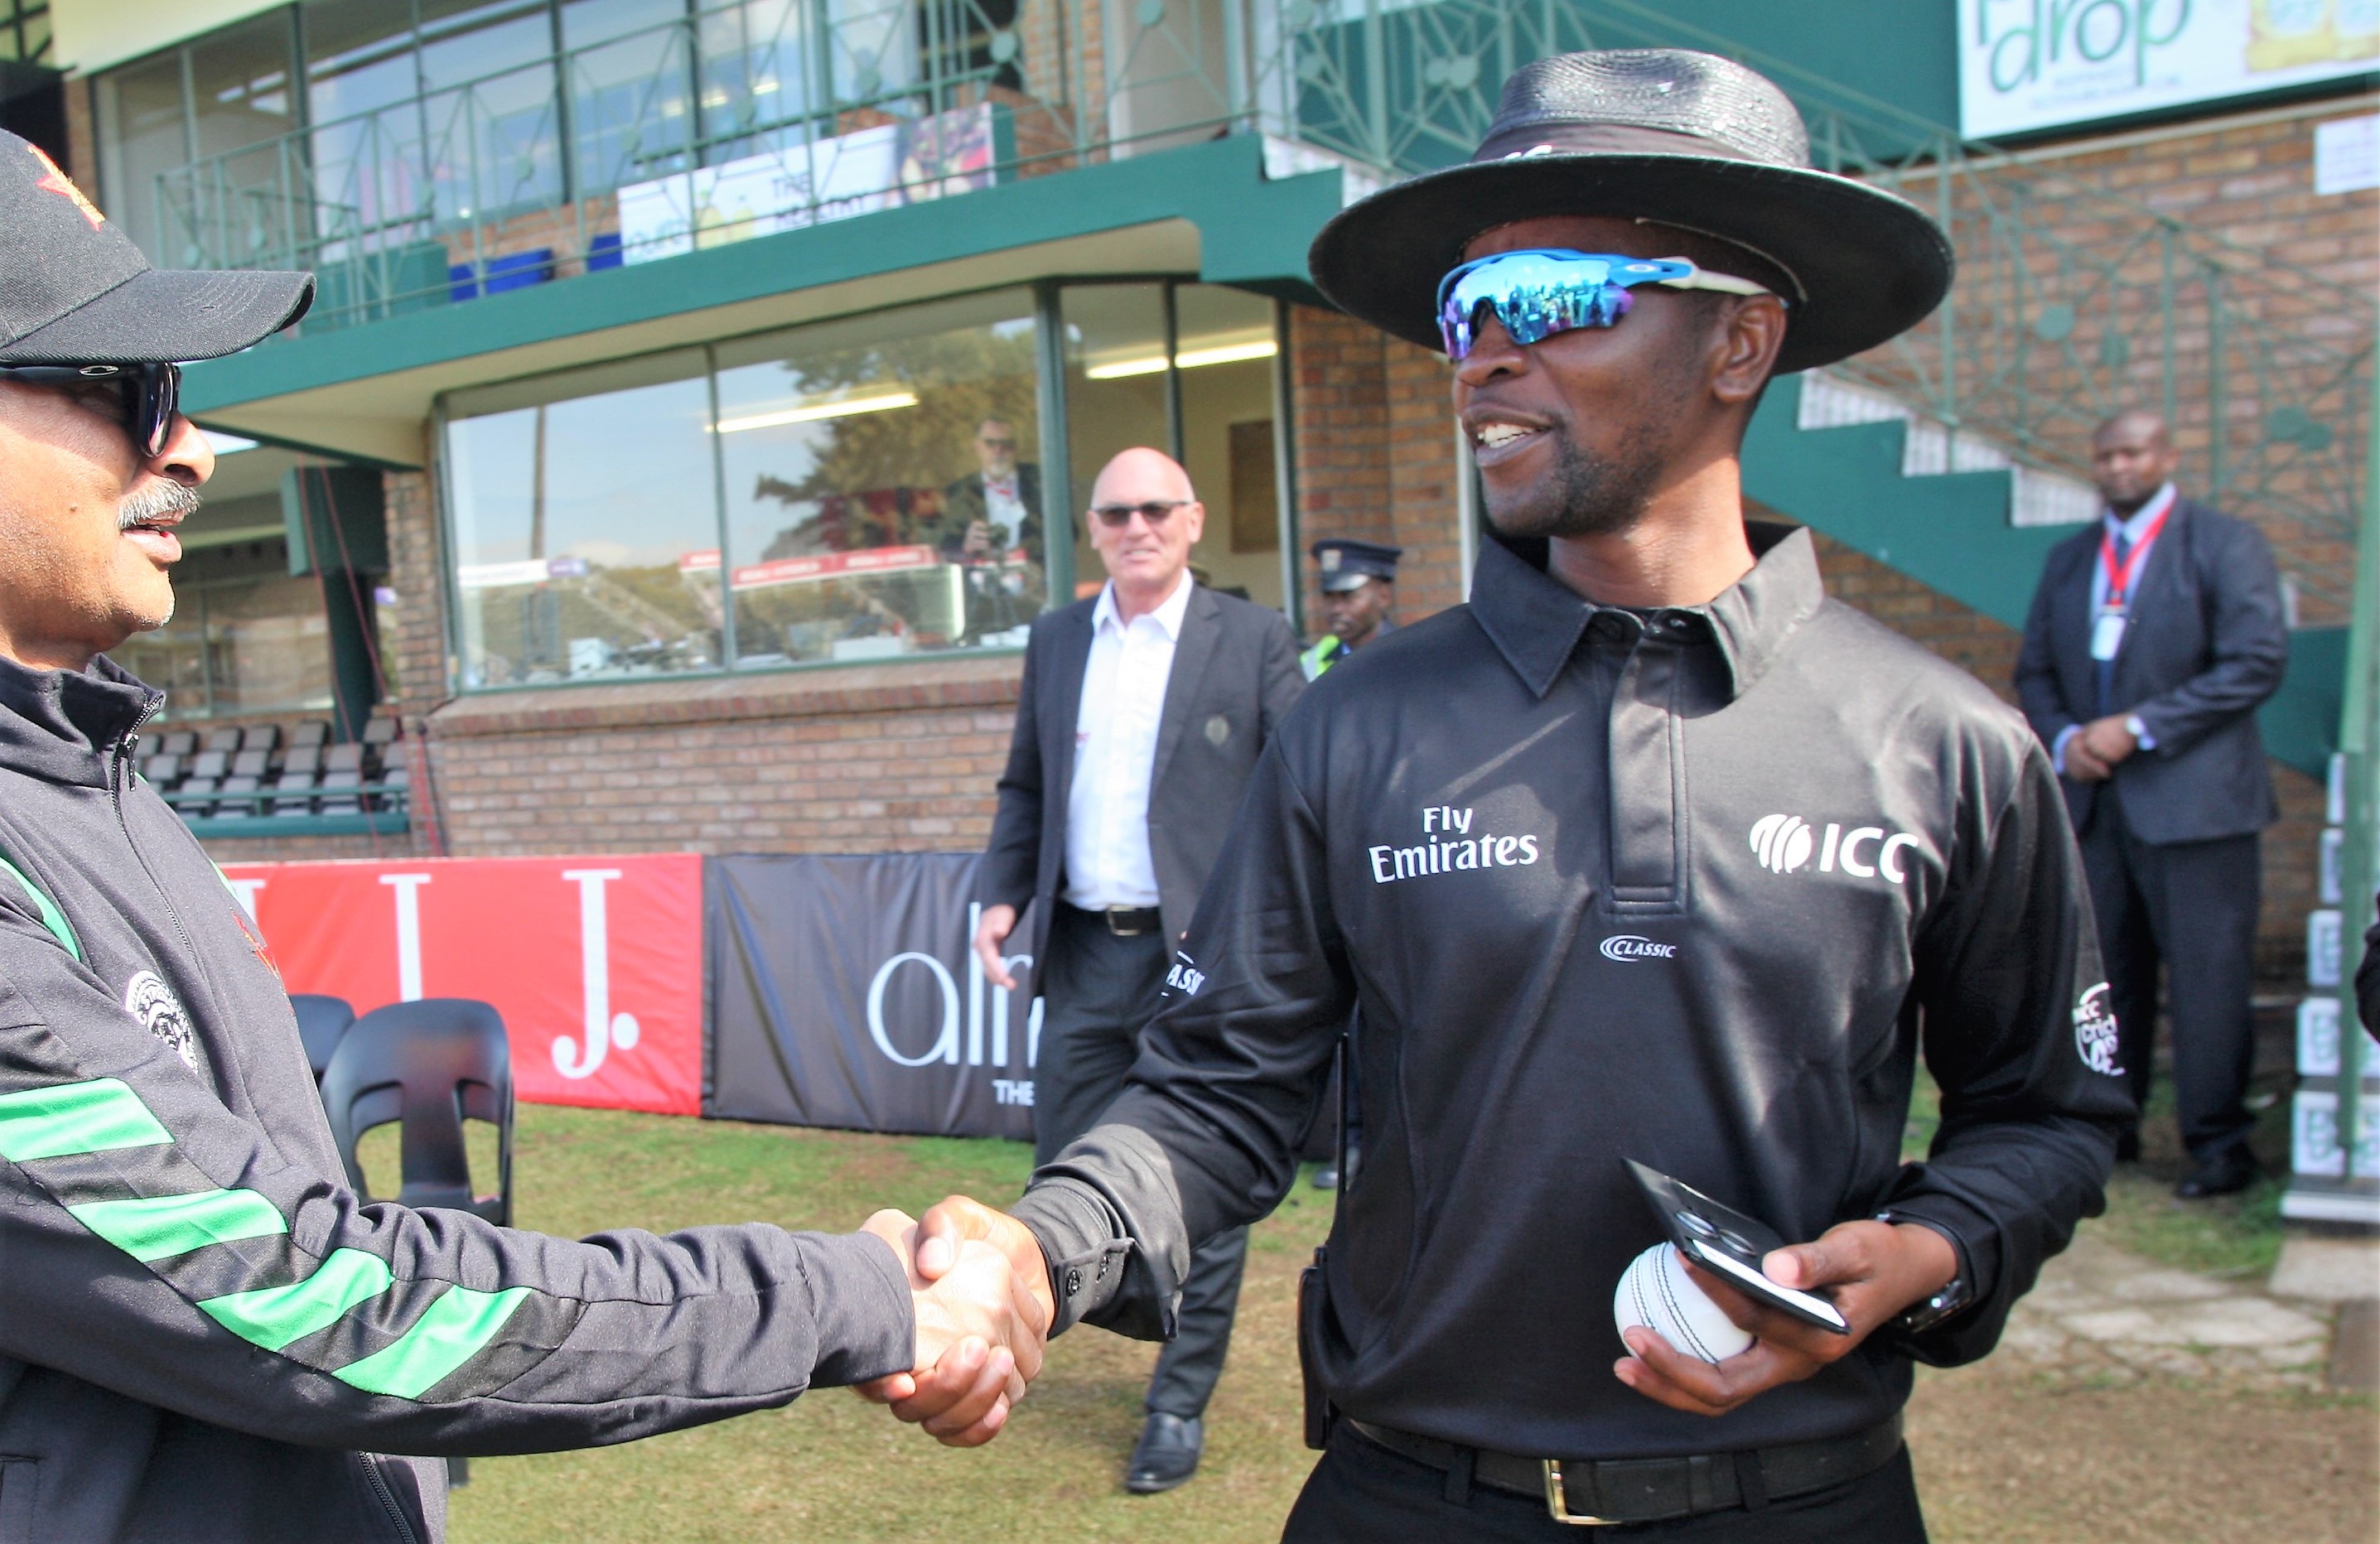 Zimbabwe’s Chabi appointed umpire for Under-19 World Cup